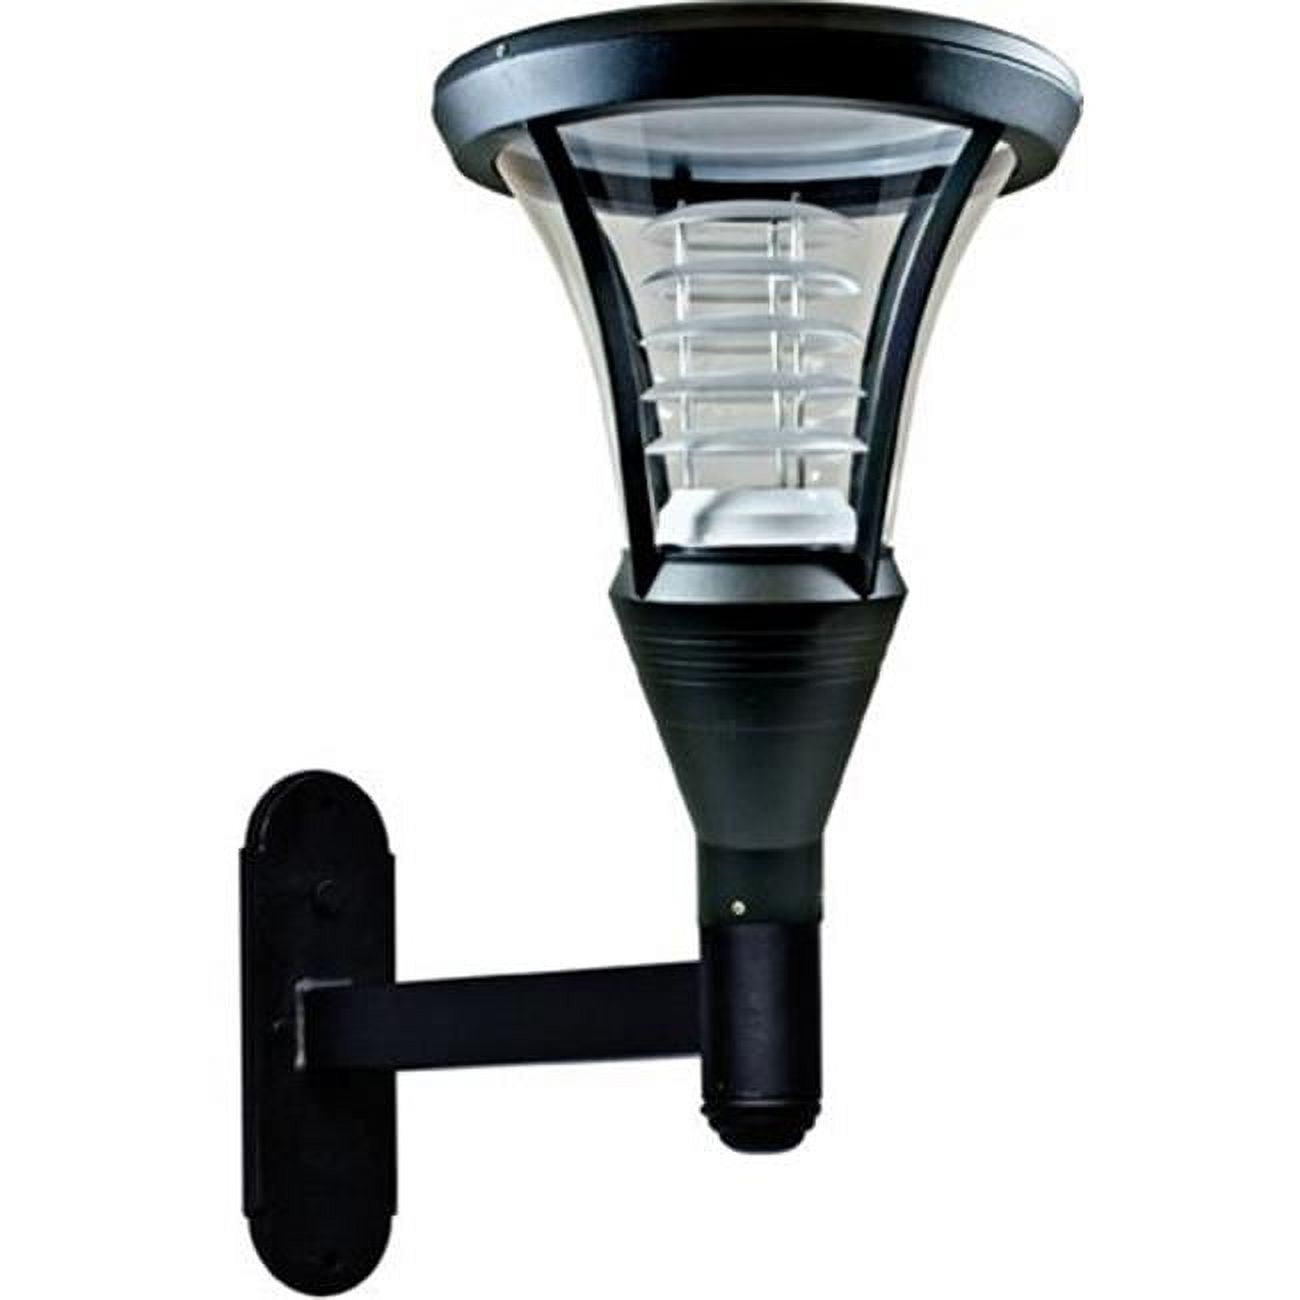 Picture of Dabmar Lighting GM633-B 70W 120V Powder Coated Cast Aluminum Wall Light Fixture with High Pressure Sodium Lamp, Black